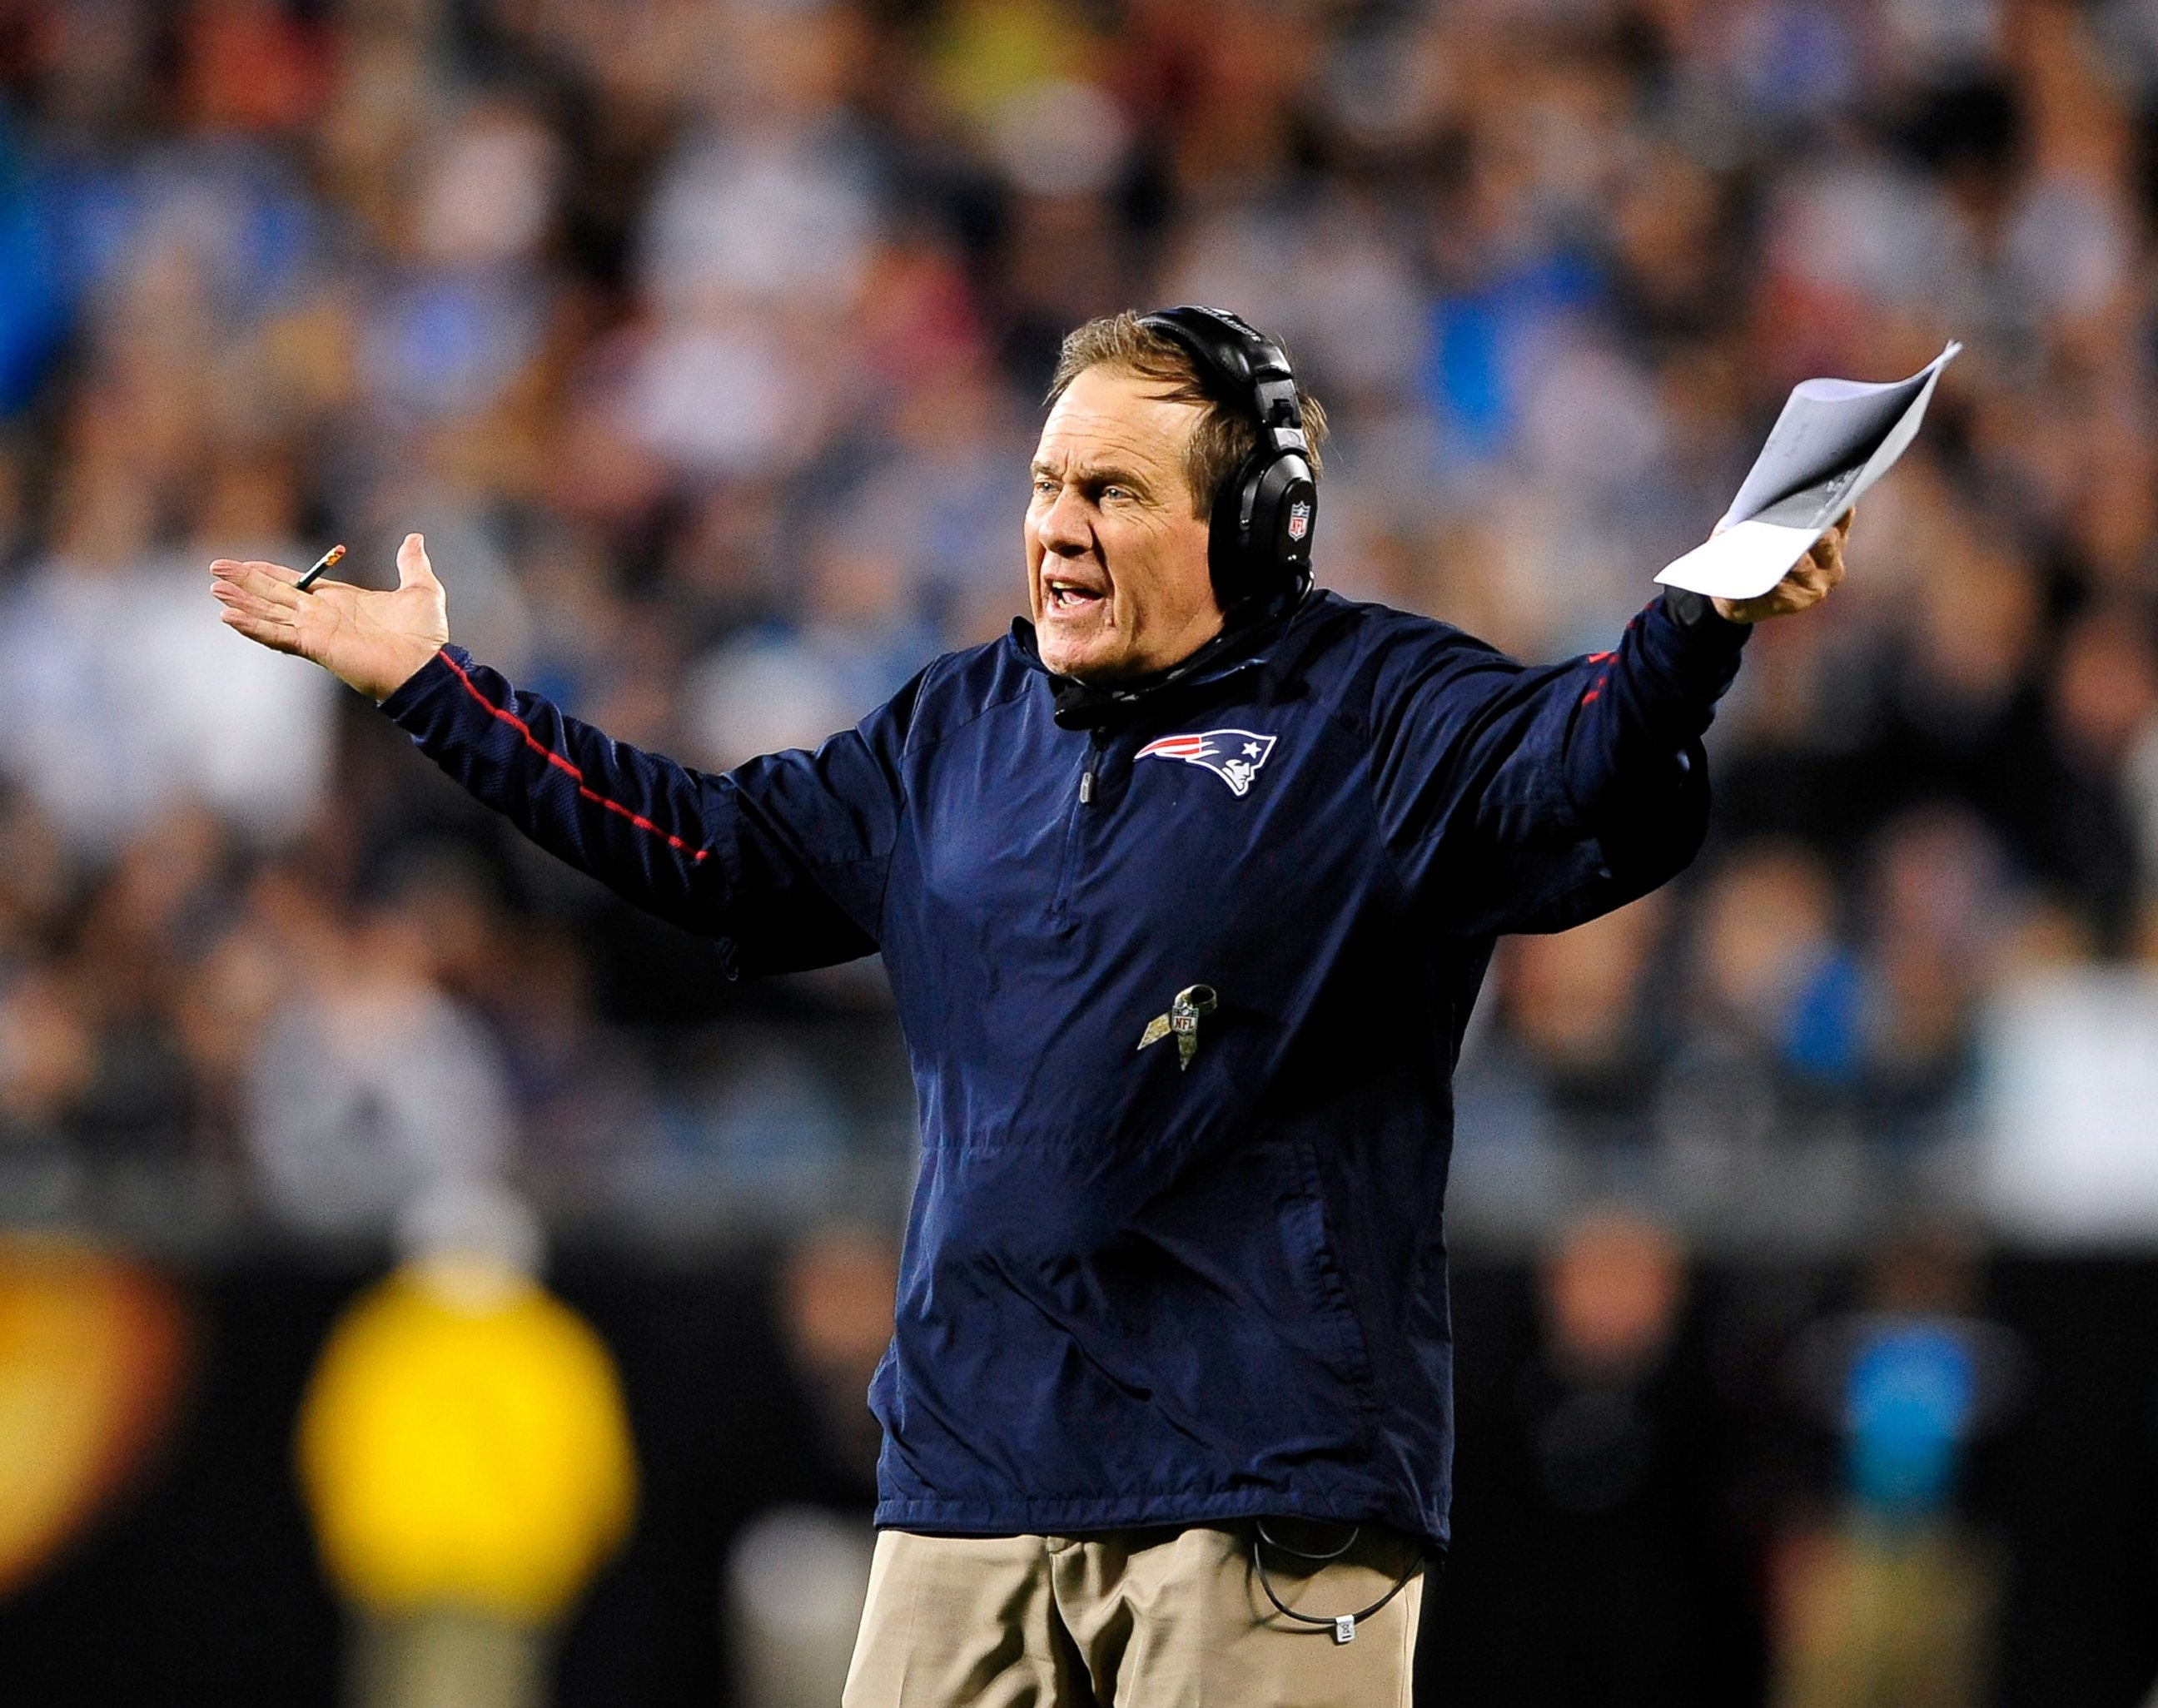 PHOTO: Coach Bill Belichick of the New England Patriots during a game against the Carolina Panthers on Nov. 18, 2013 in Charlotte, North Carolina. 